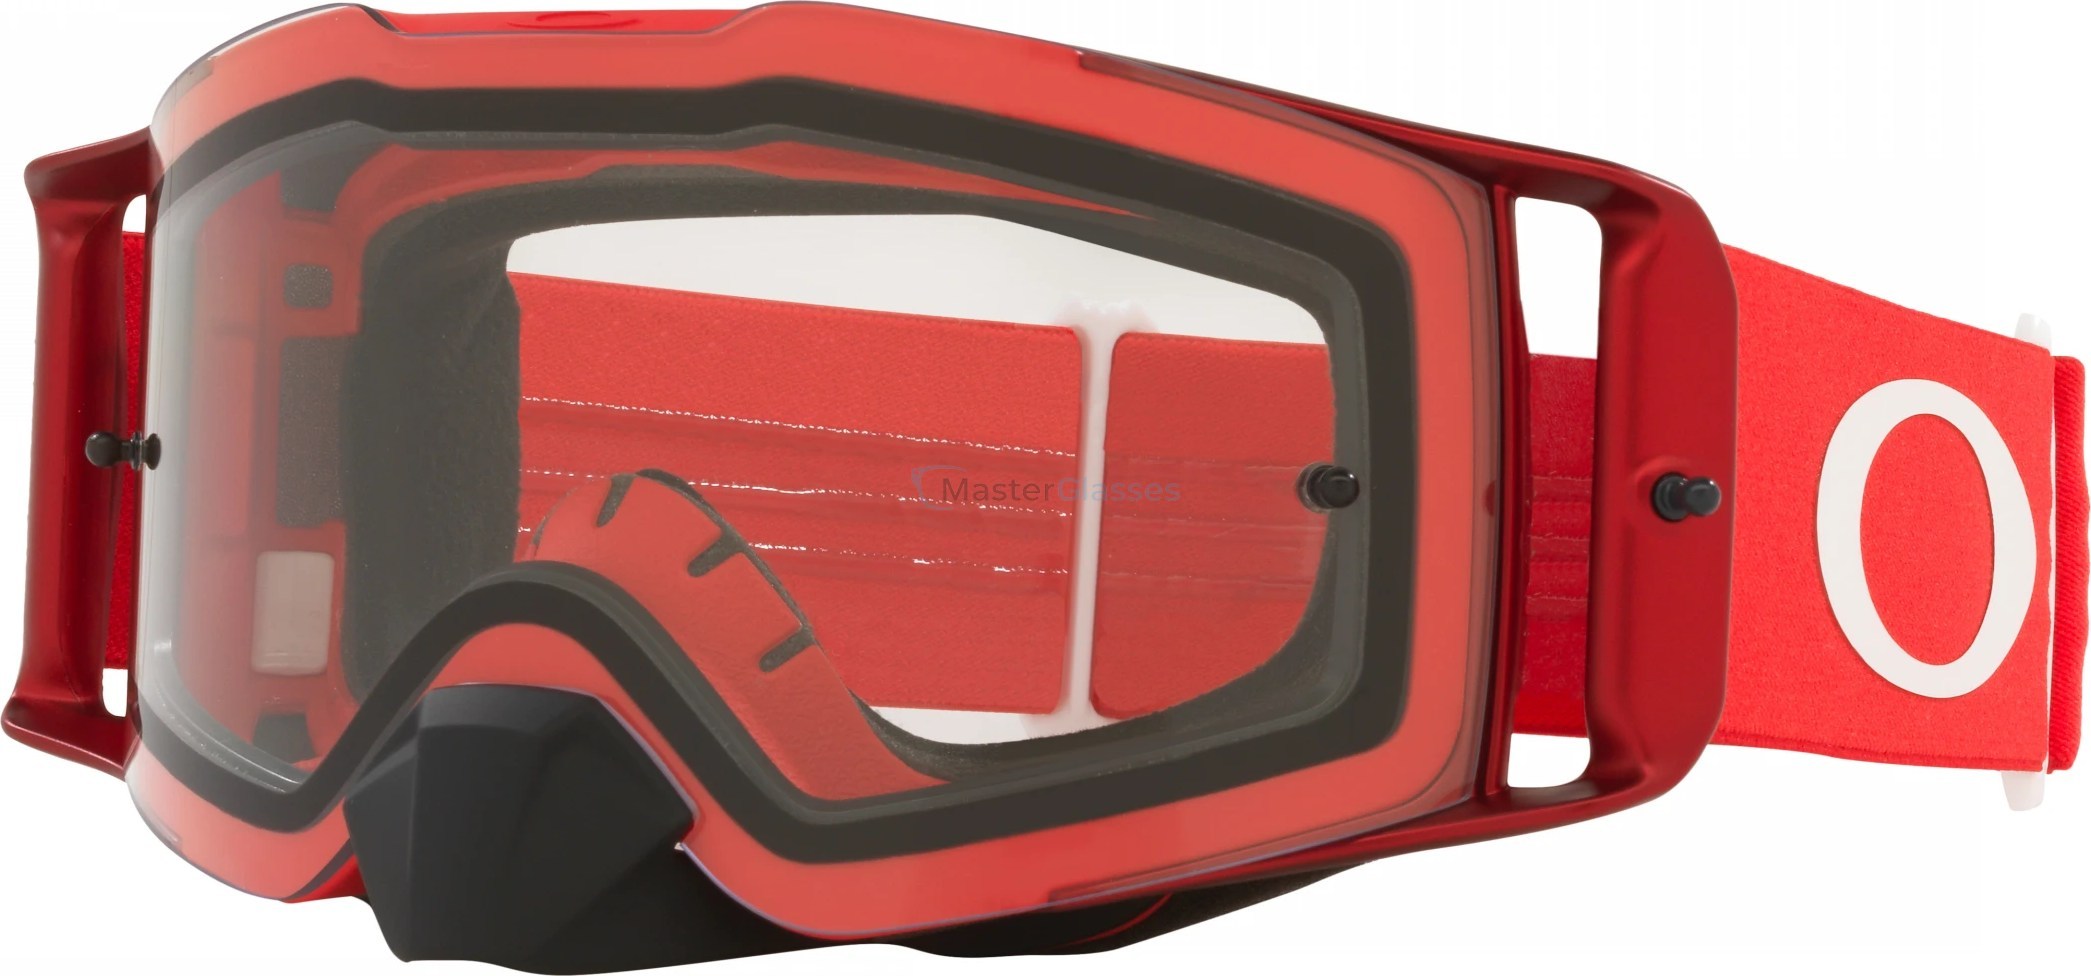    Oakley mx goggles Front Line Mx OO7087 708779 Moto Red